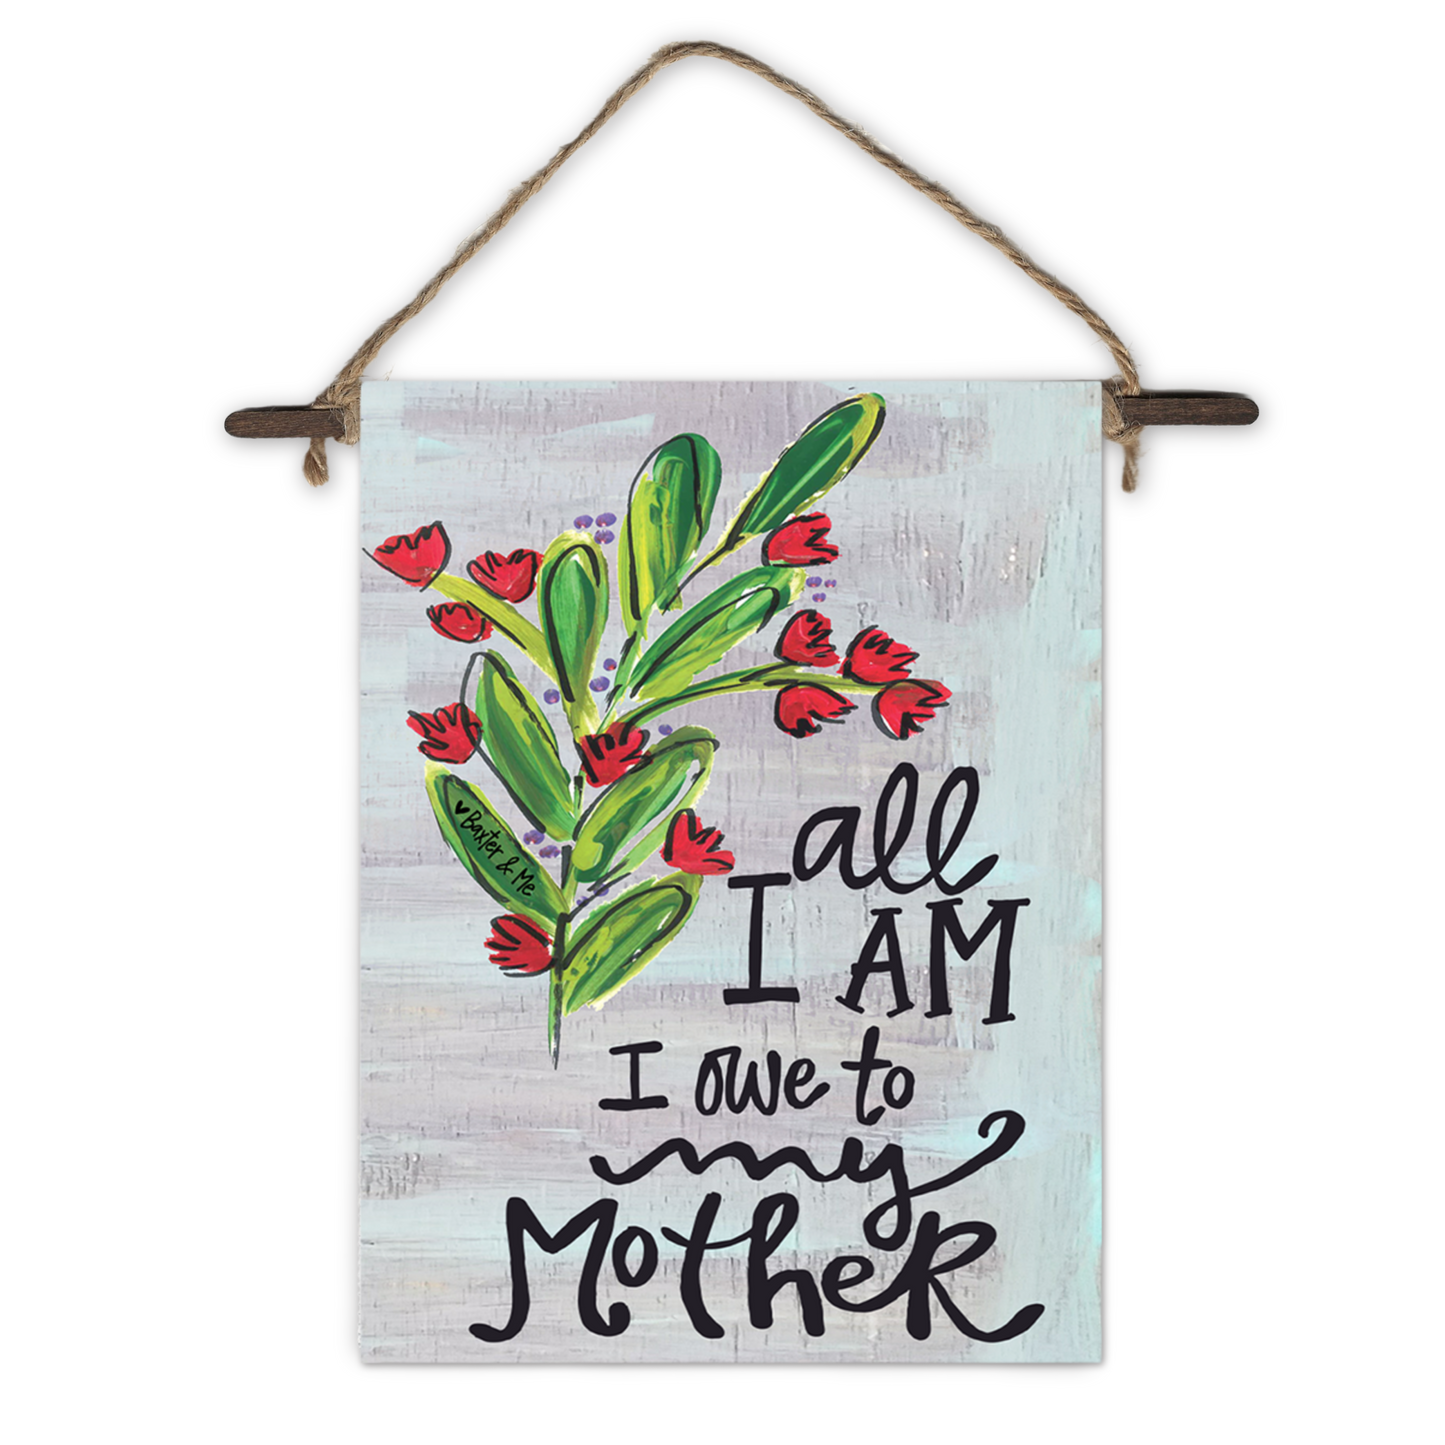 Owe All to my Mother Mini Wall Hanging